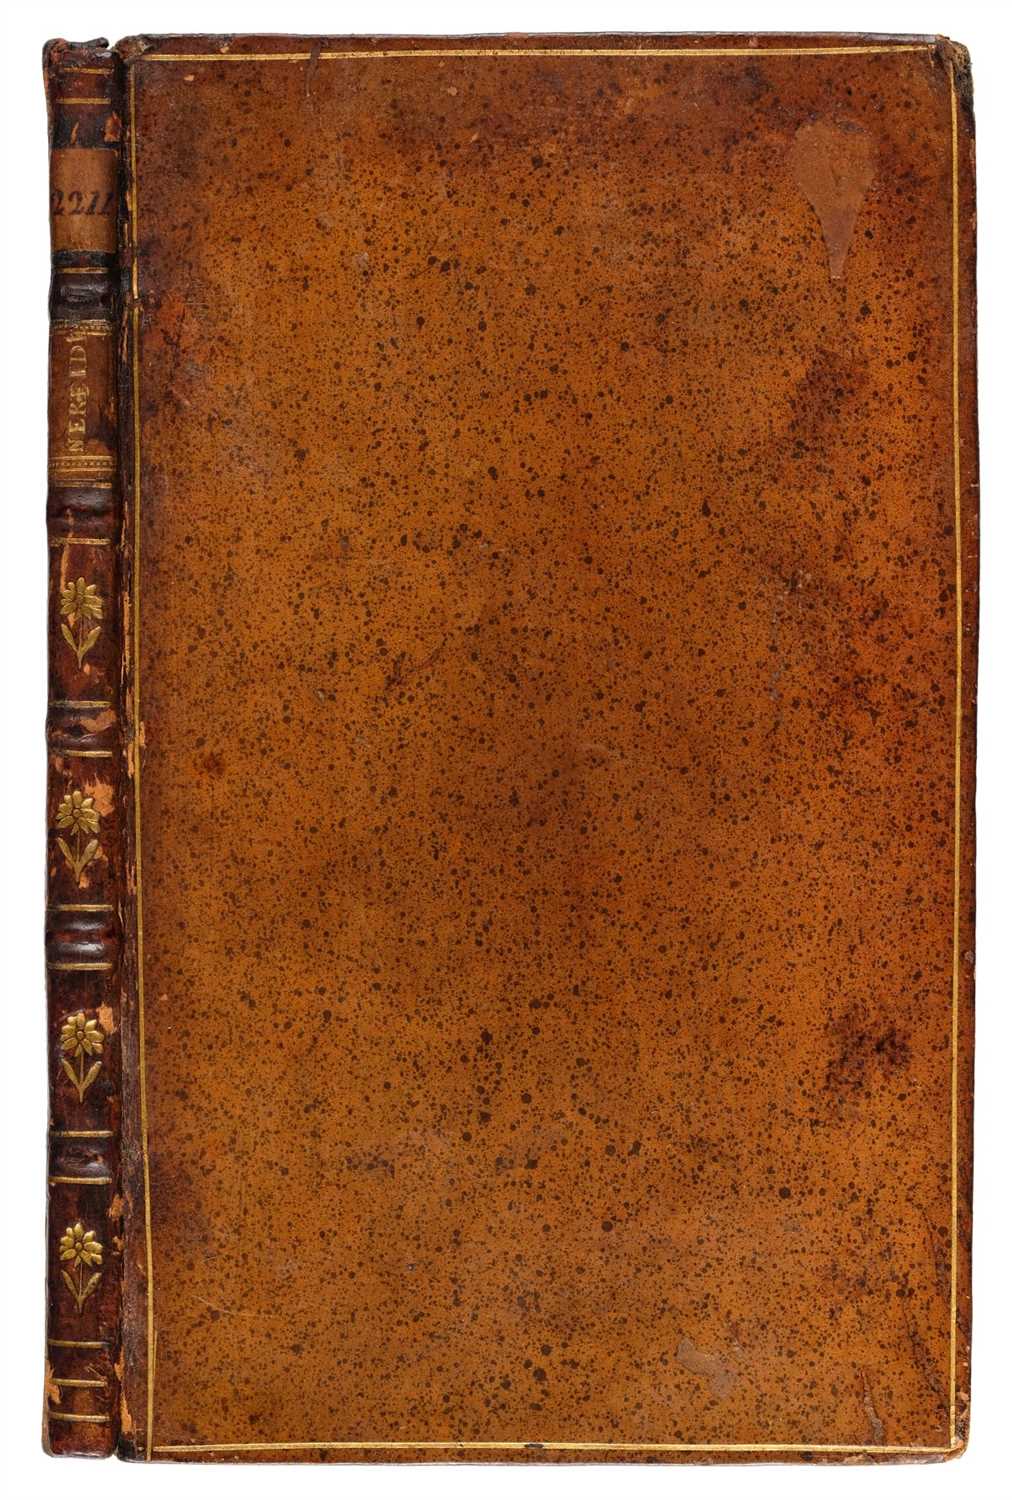 Lot 133 - Diaper (William). Nereides: or, Sea-Eclogues, 1st edition, printed by J. H. for E. Sanger, 1712